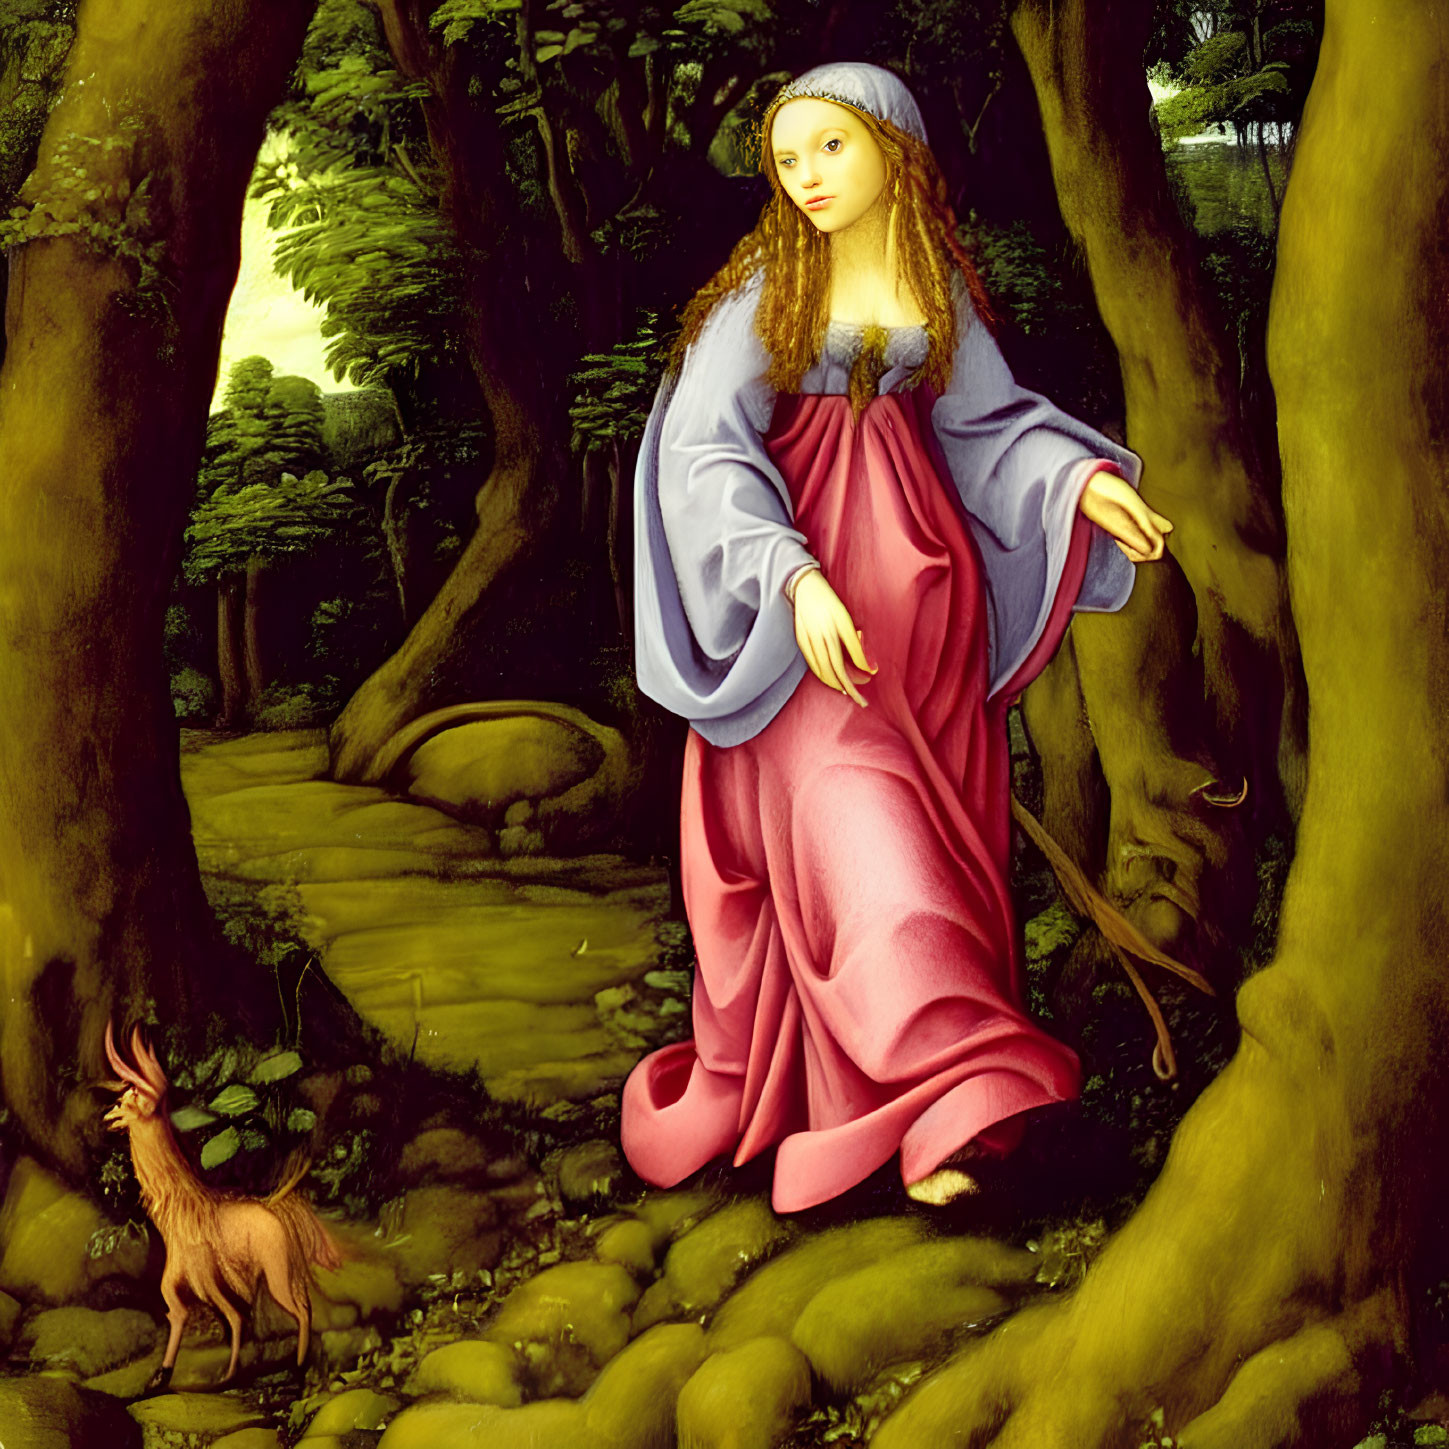 Woman in Red Dress and Blue Cloak with Deer in Forest Scene